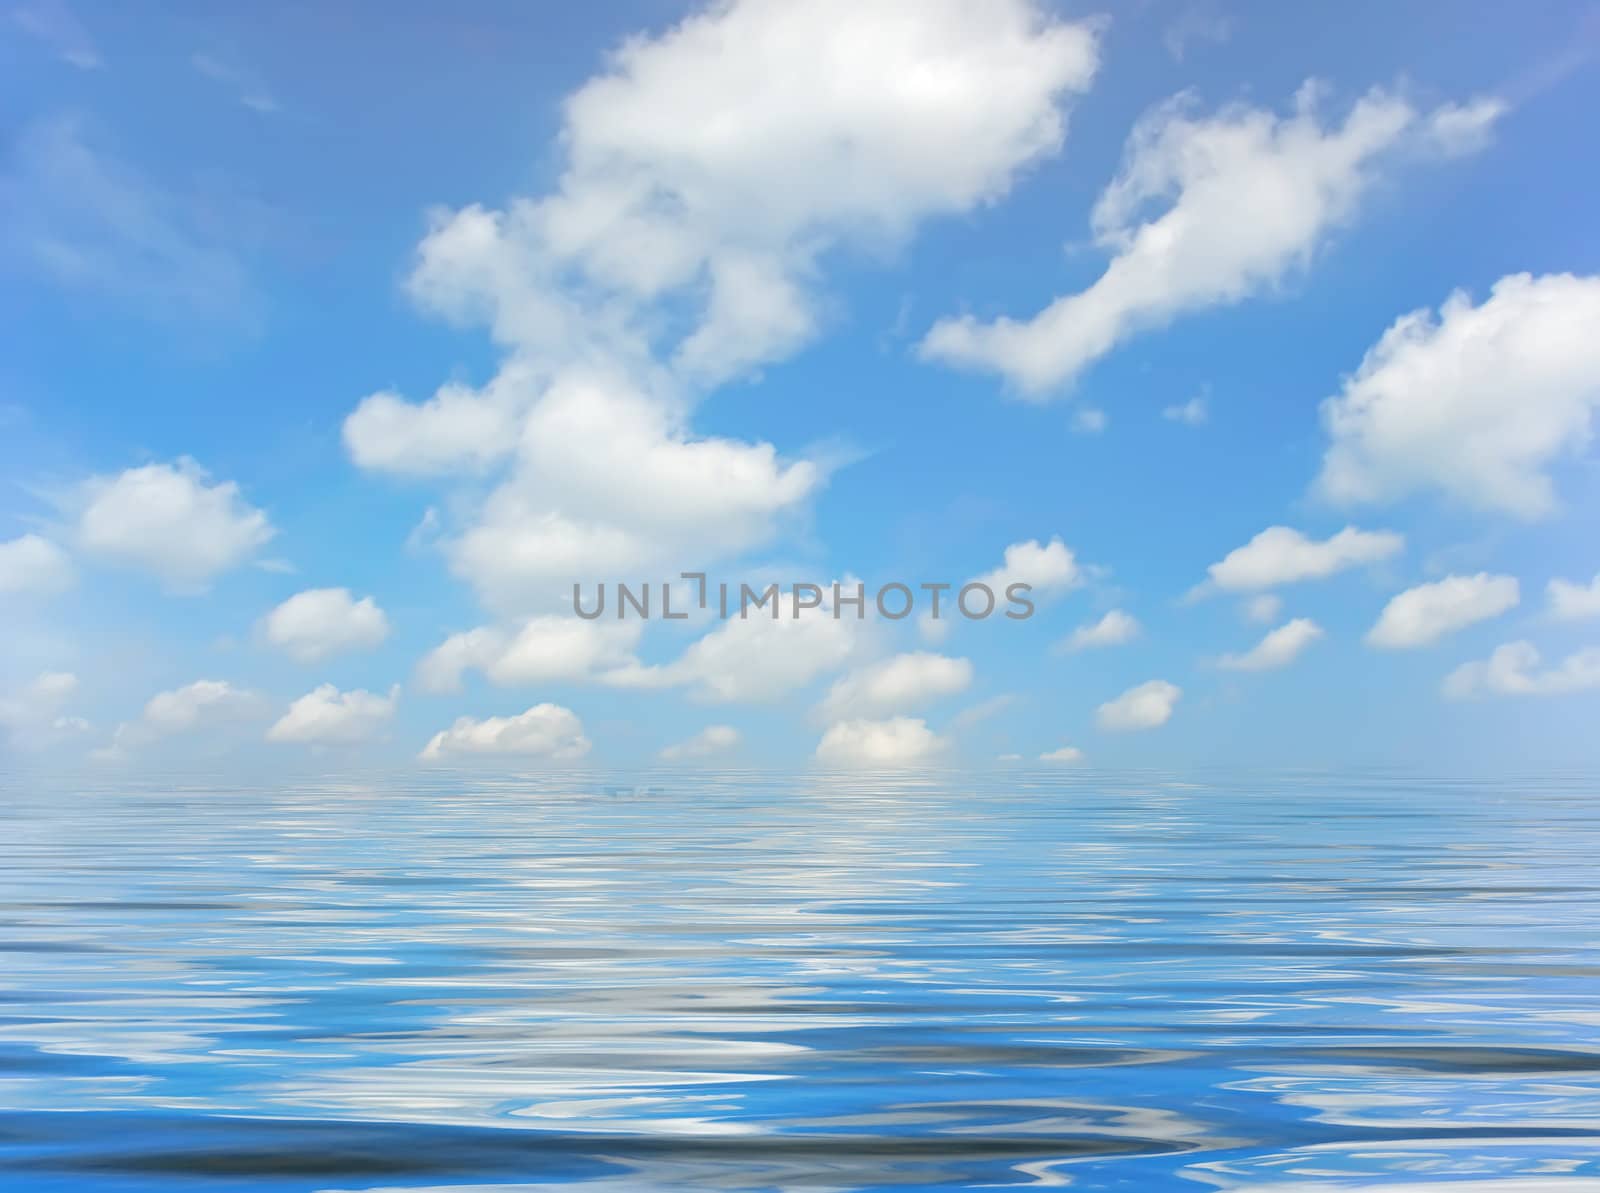 Background image of the blue sky and seas by xfdly5